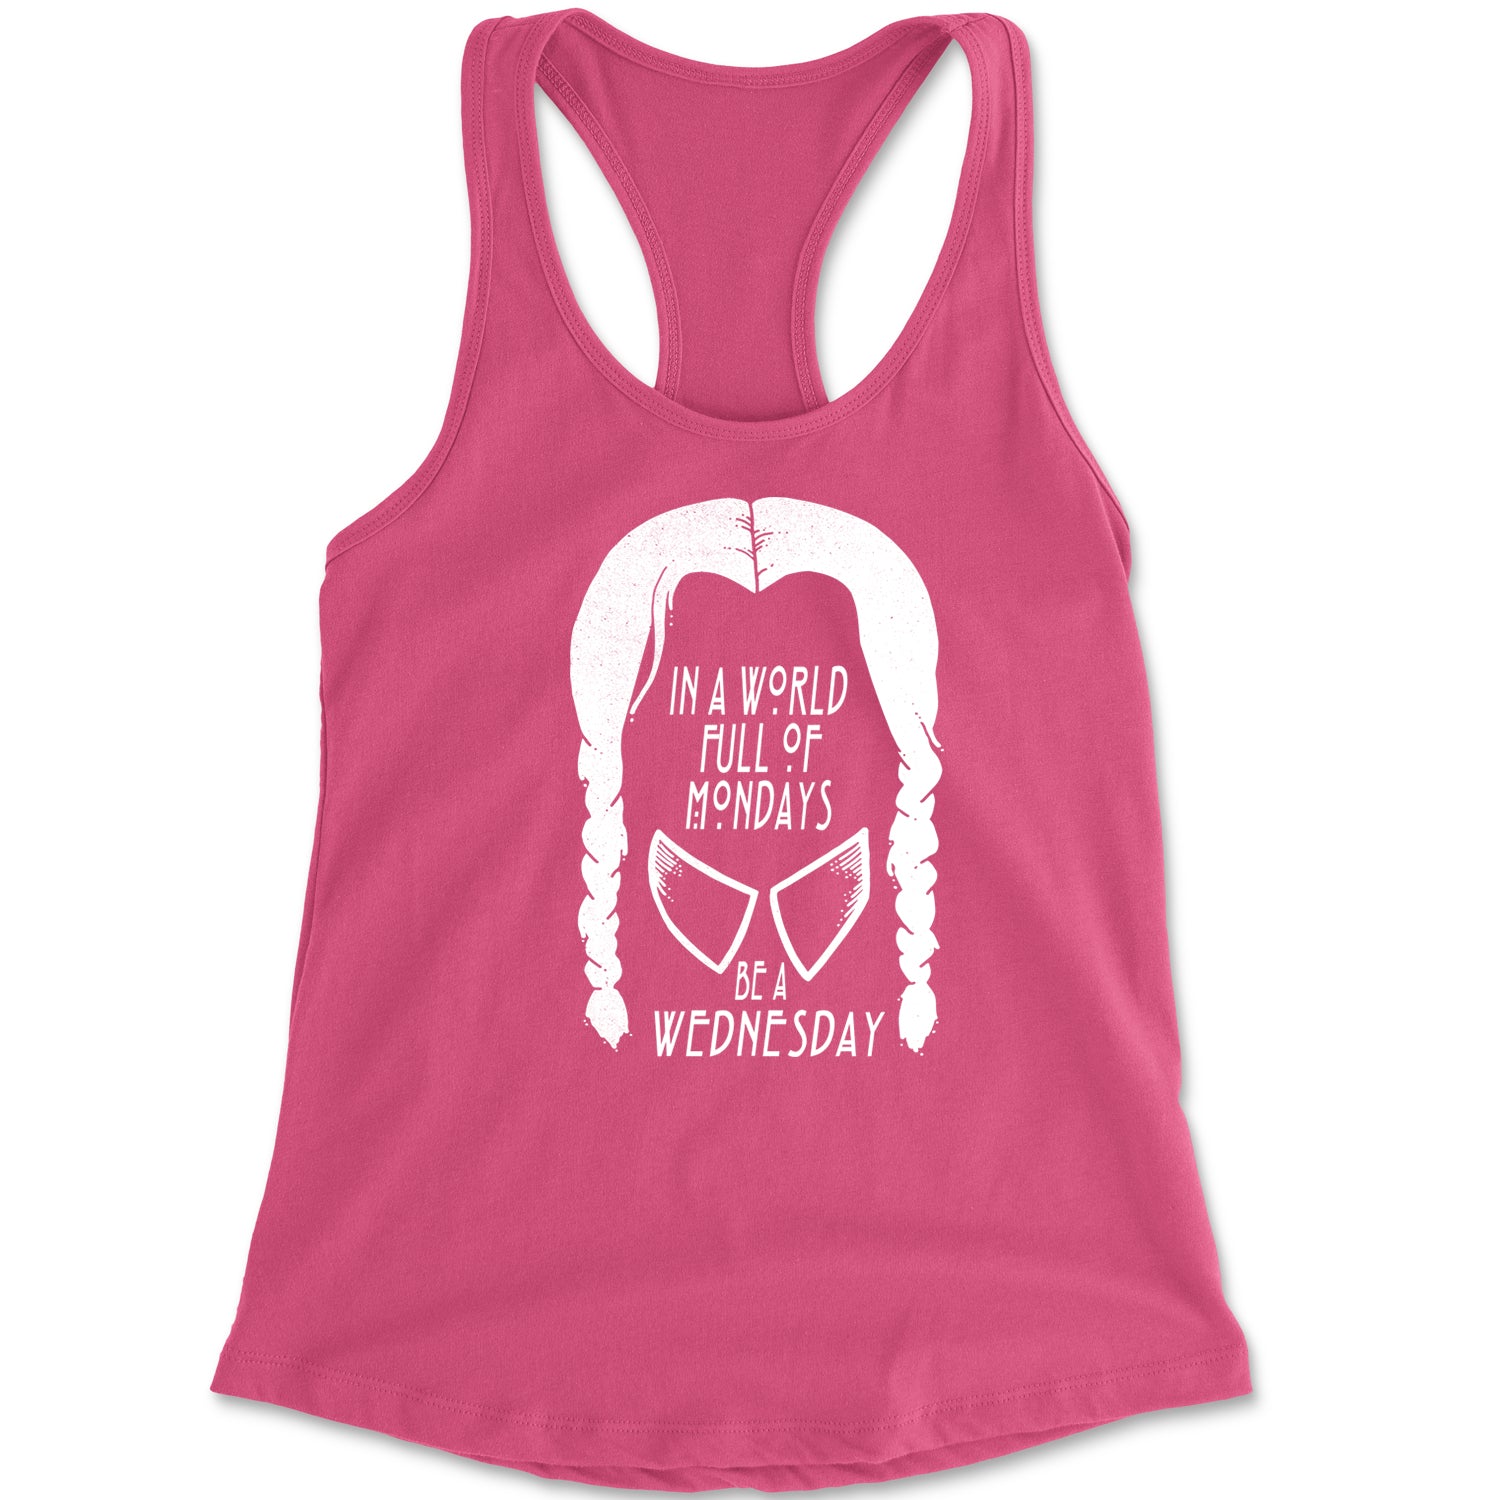 In A World Full Of Mondays, Be A Wednesday Racerback Tank Top for Women academy, jericho, more, never, nevermore, vermont, Wednesday by Expression Tees